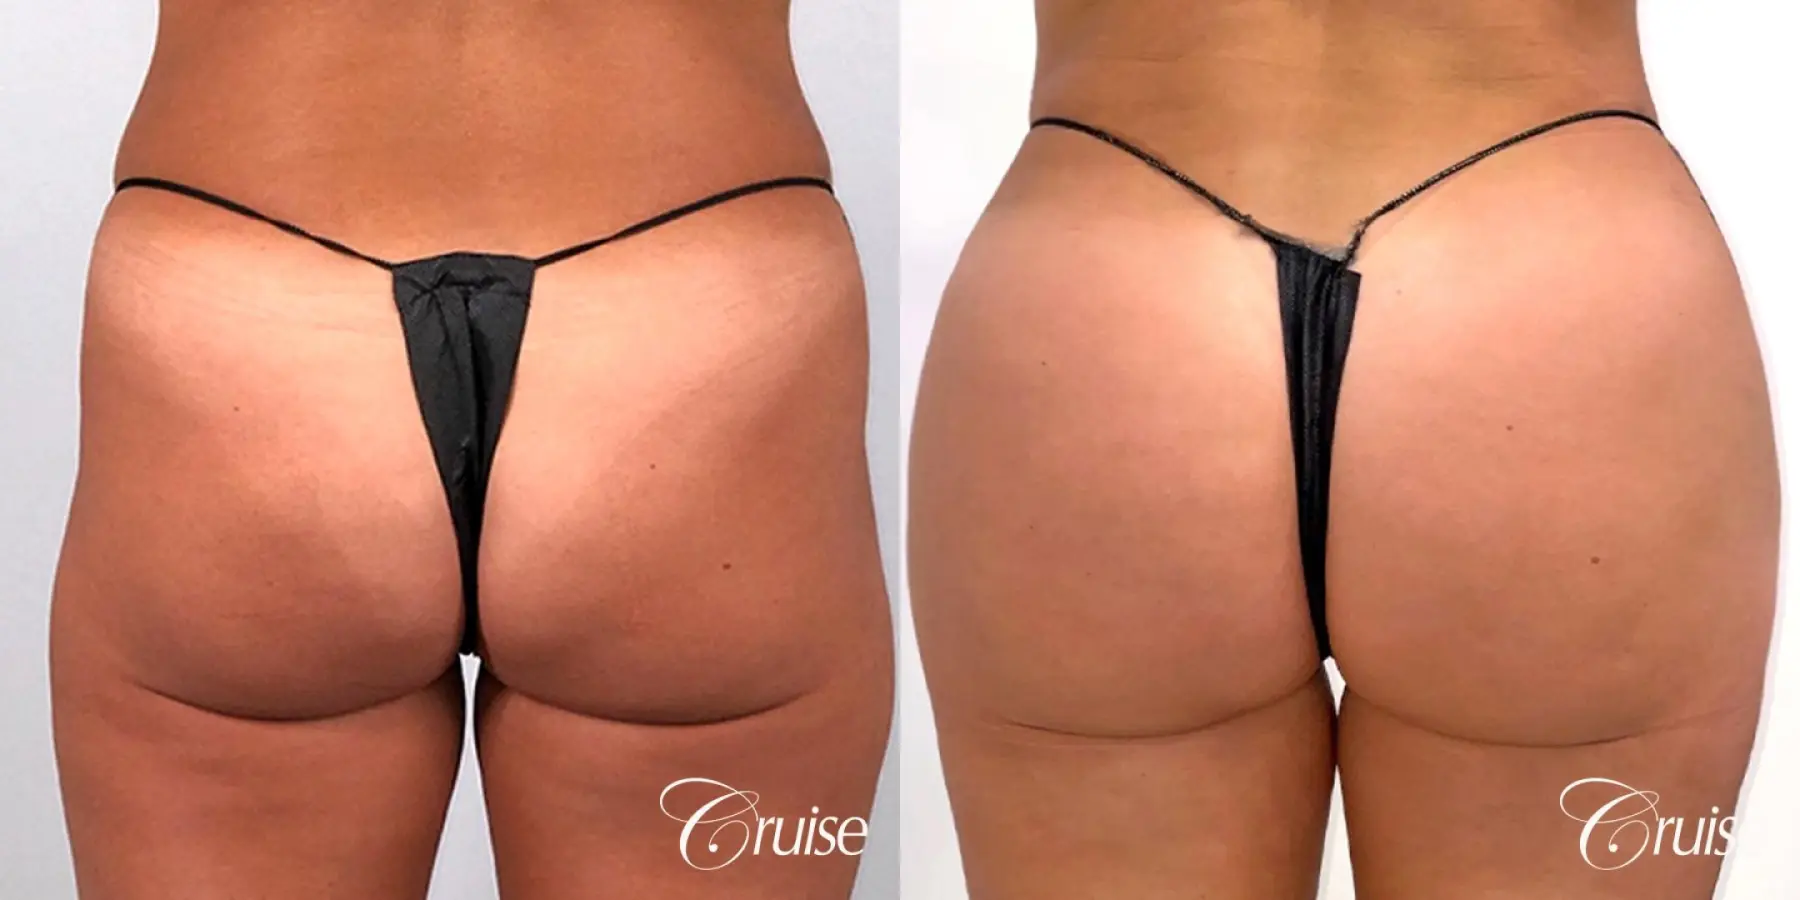 Brazilian Butt Lift with Liposuction to Stomach & Flanks - Before and After